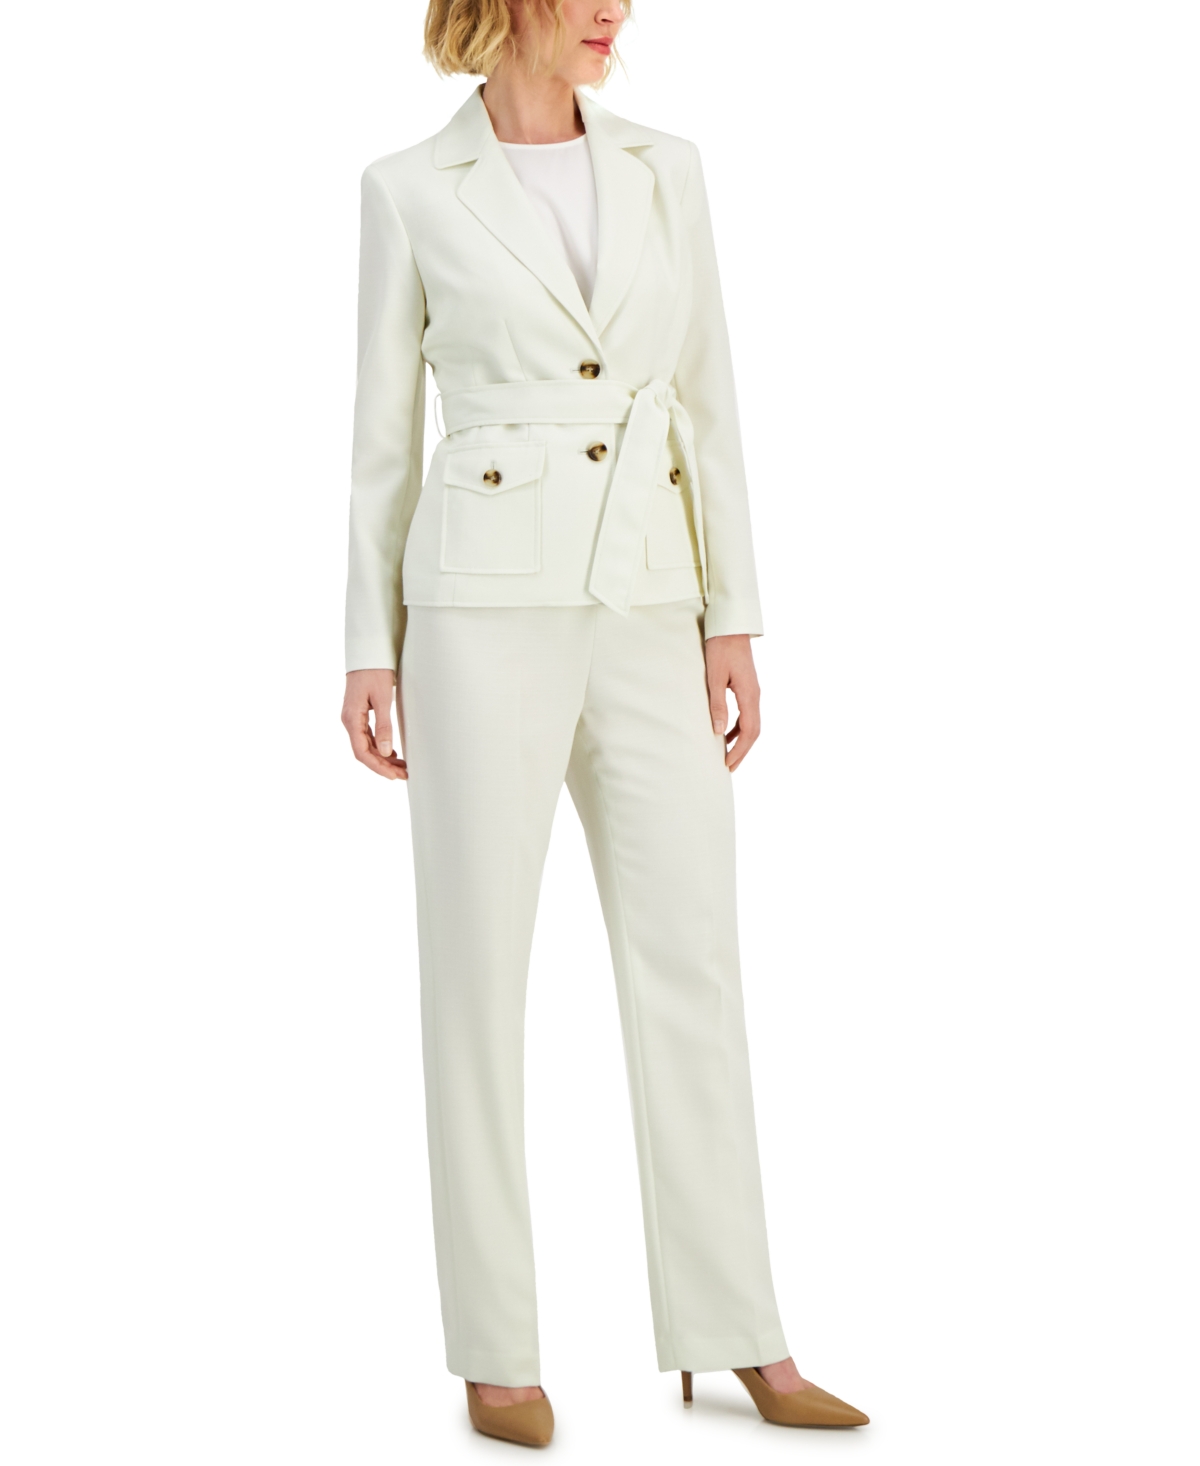 Le Suit Women's Belted Pant Suit, Regular And Petite Sizes In Flax ...